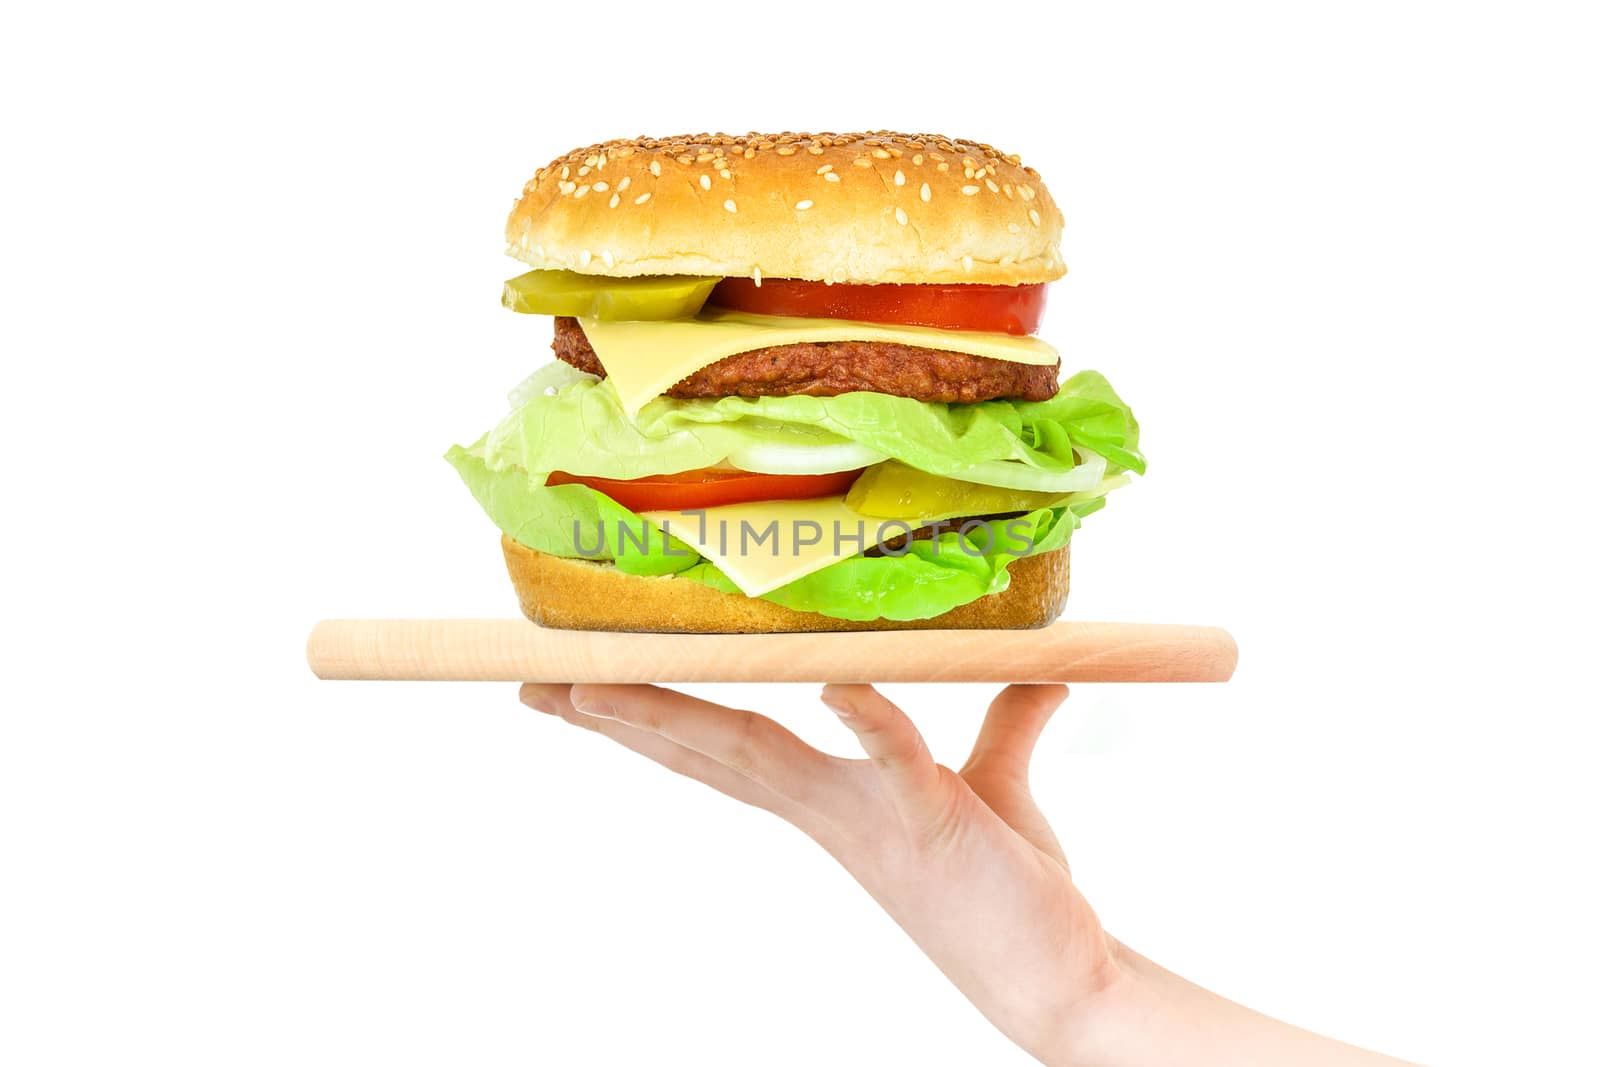 Hamburger on a wooden tray by wdnet_studio